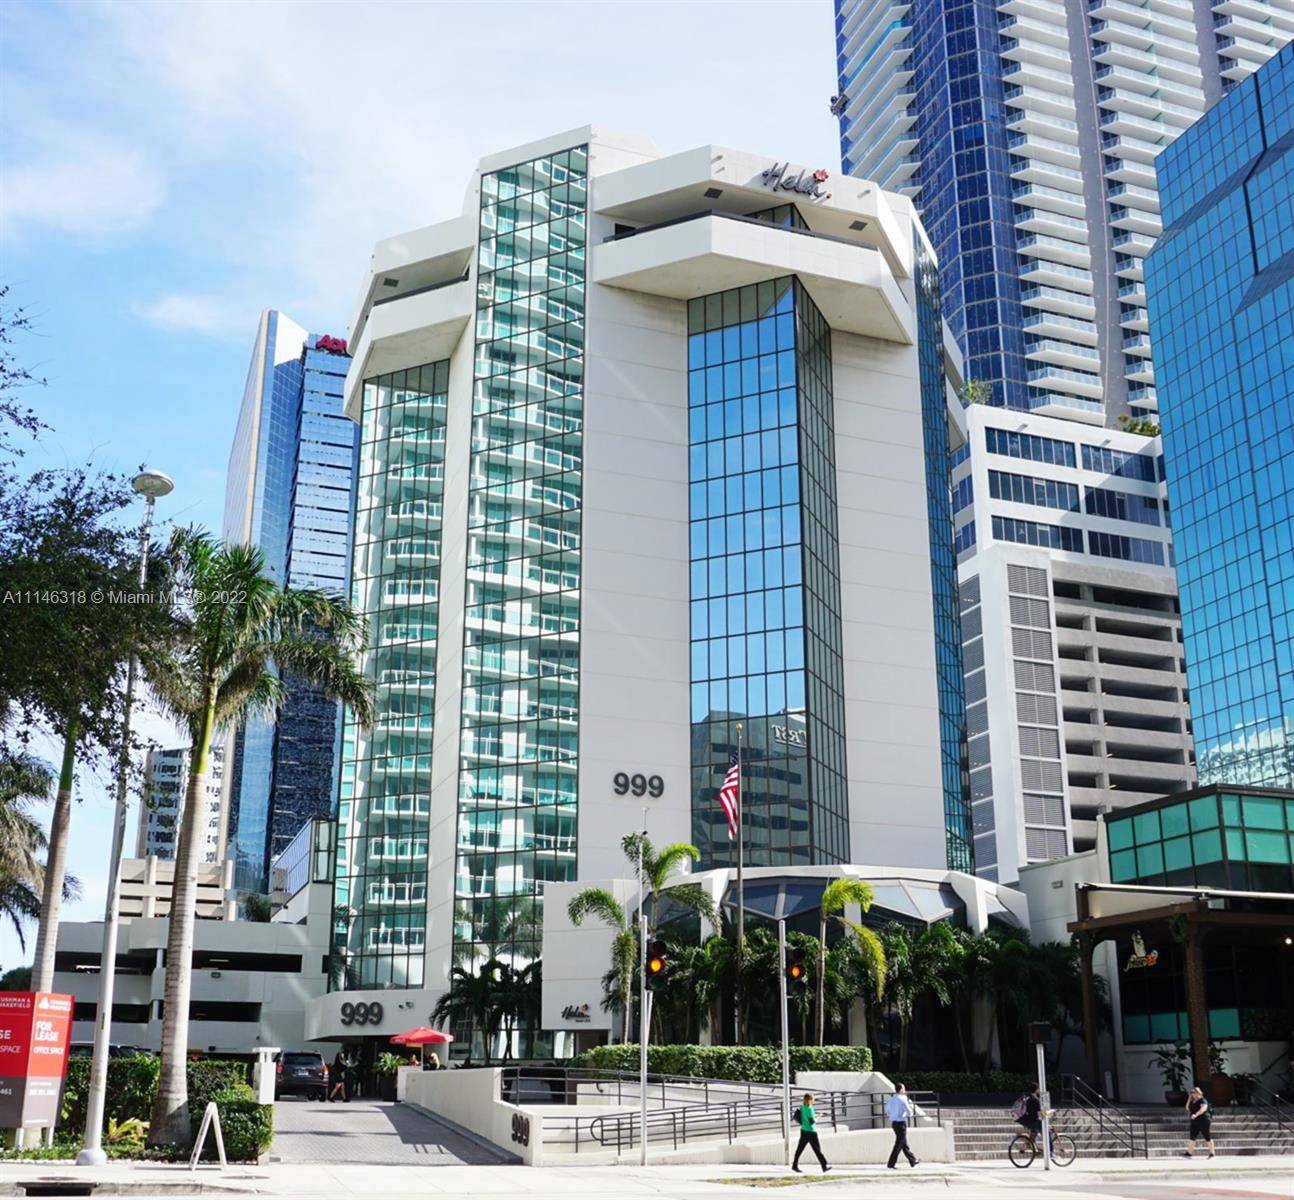 Class B Office building located in the heart of Brickell Avenue and Financial District.